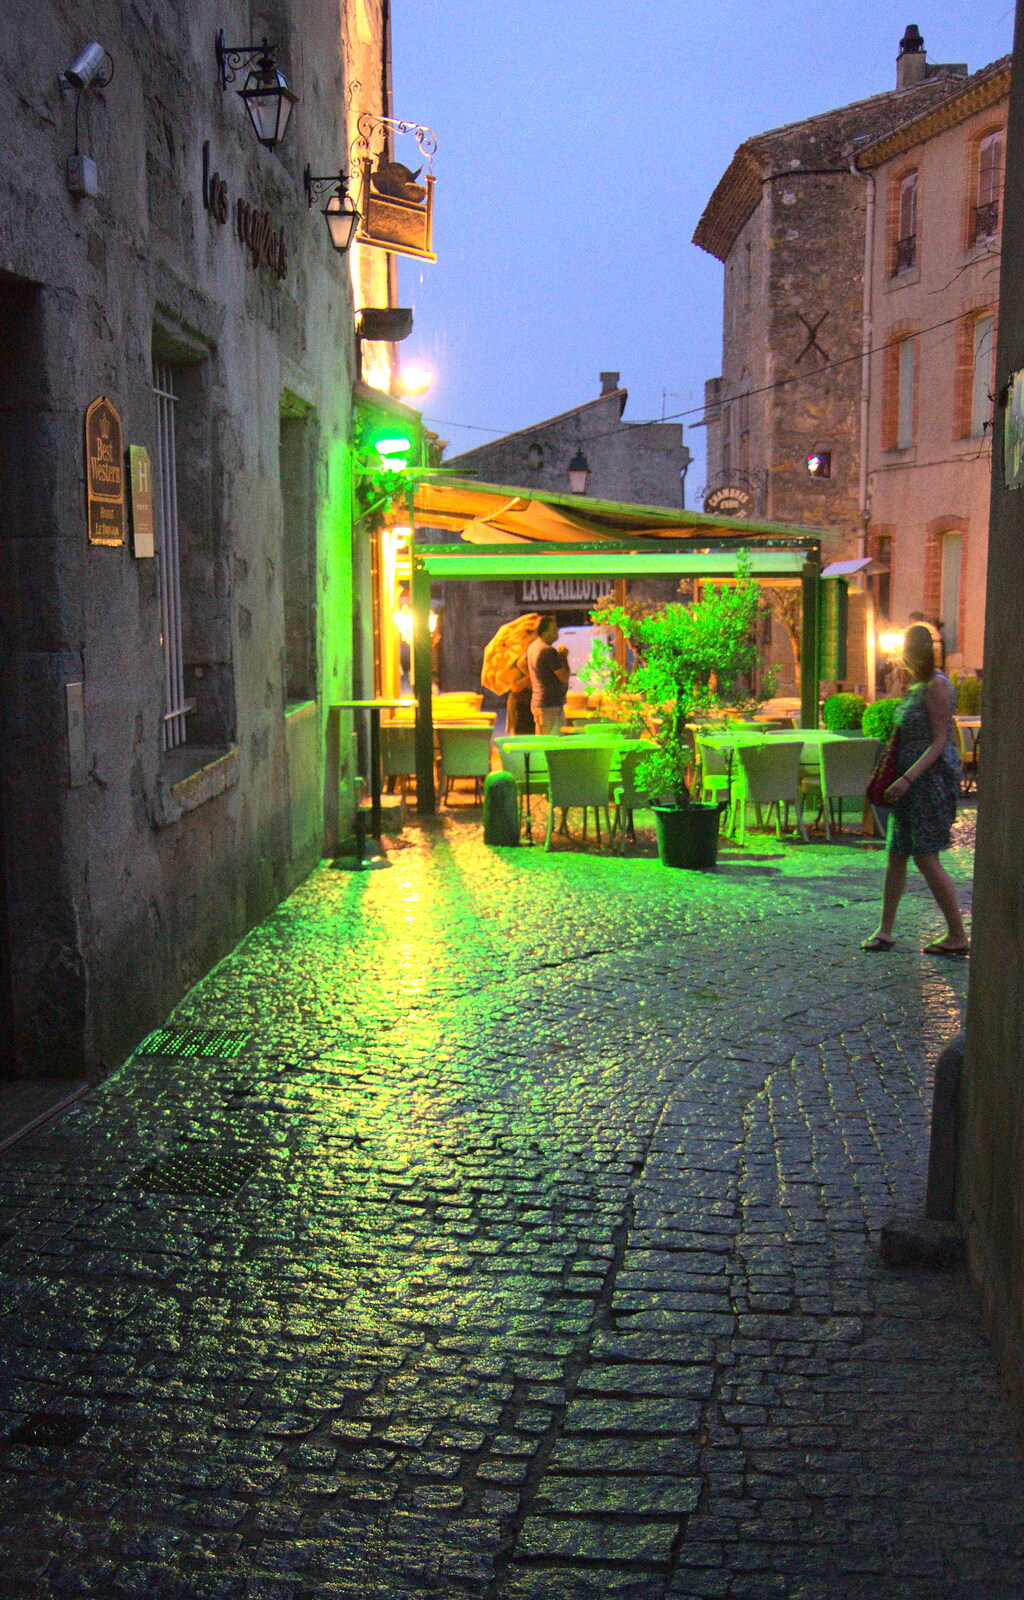 Green-lit cobbles from A Trip to Carcassonne, Aude, France - 8th August 2018